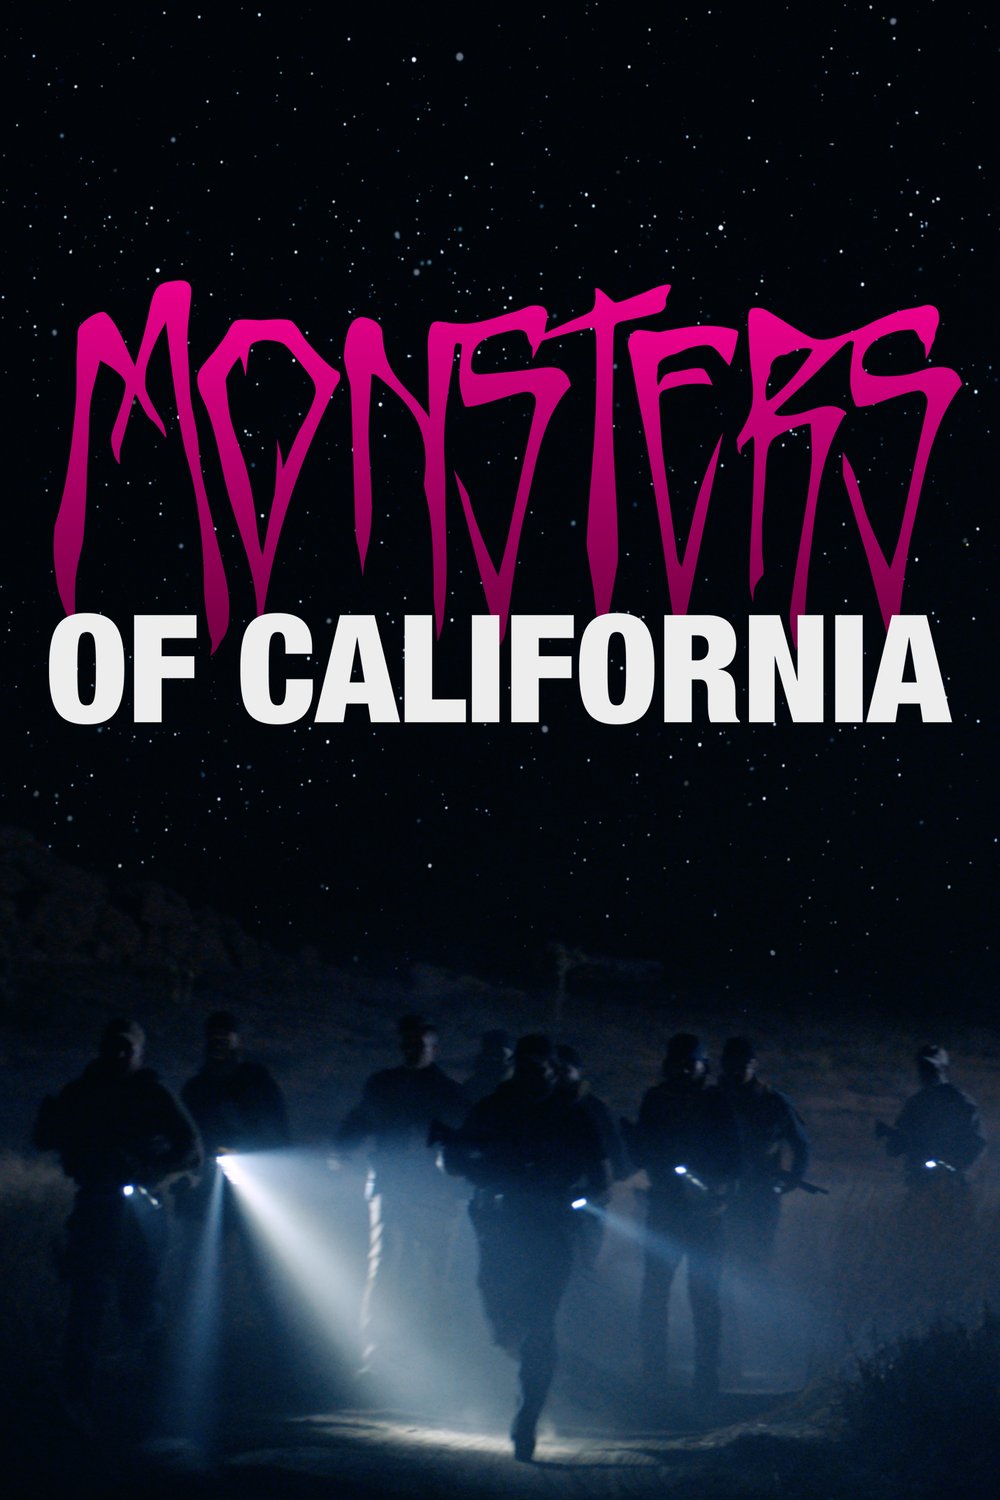 Poster of the movie Monsters of California